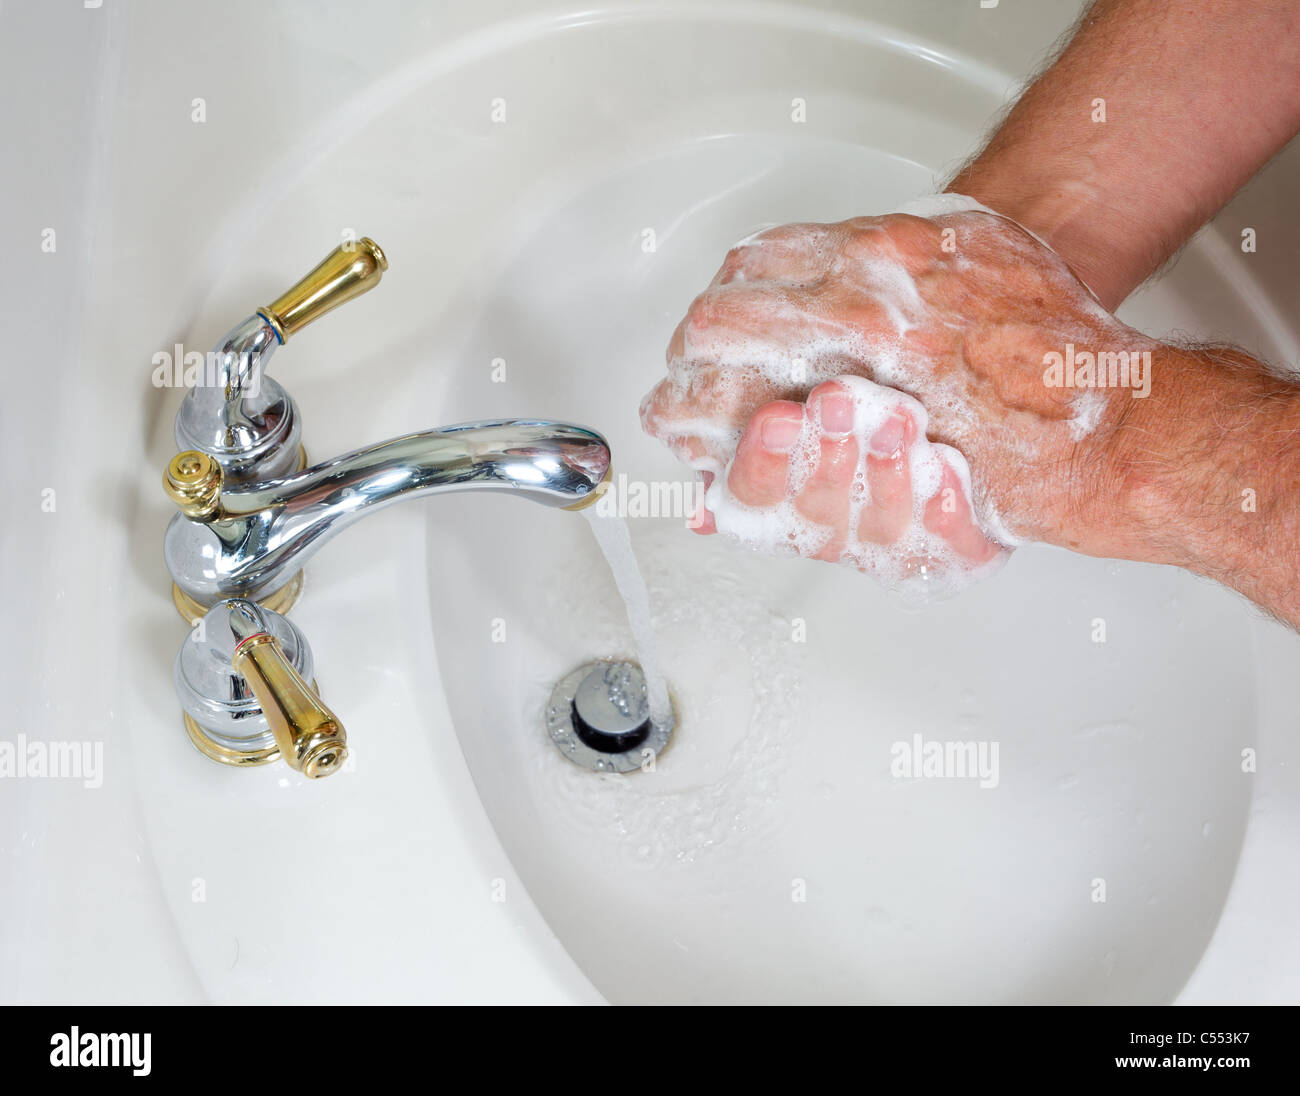 Senior man washing hands in modern sink with soap and lathering suds Stock Photo